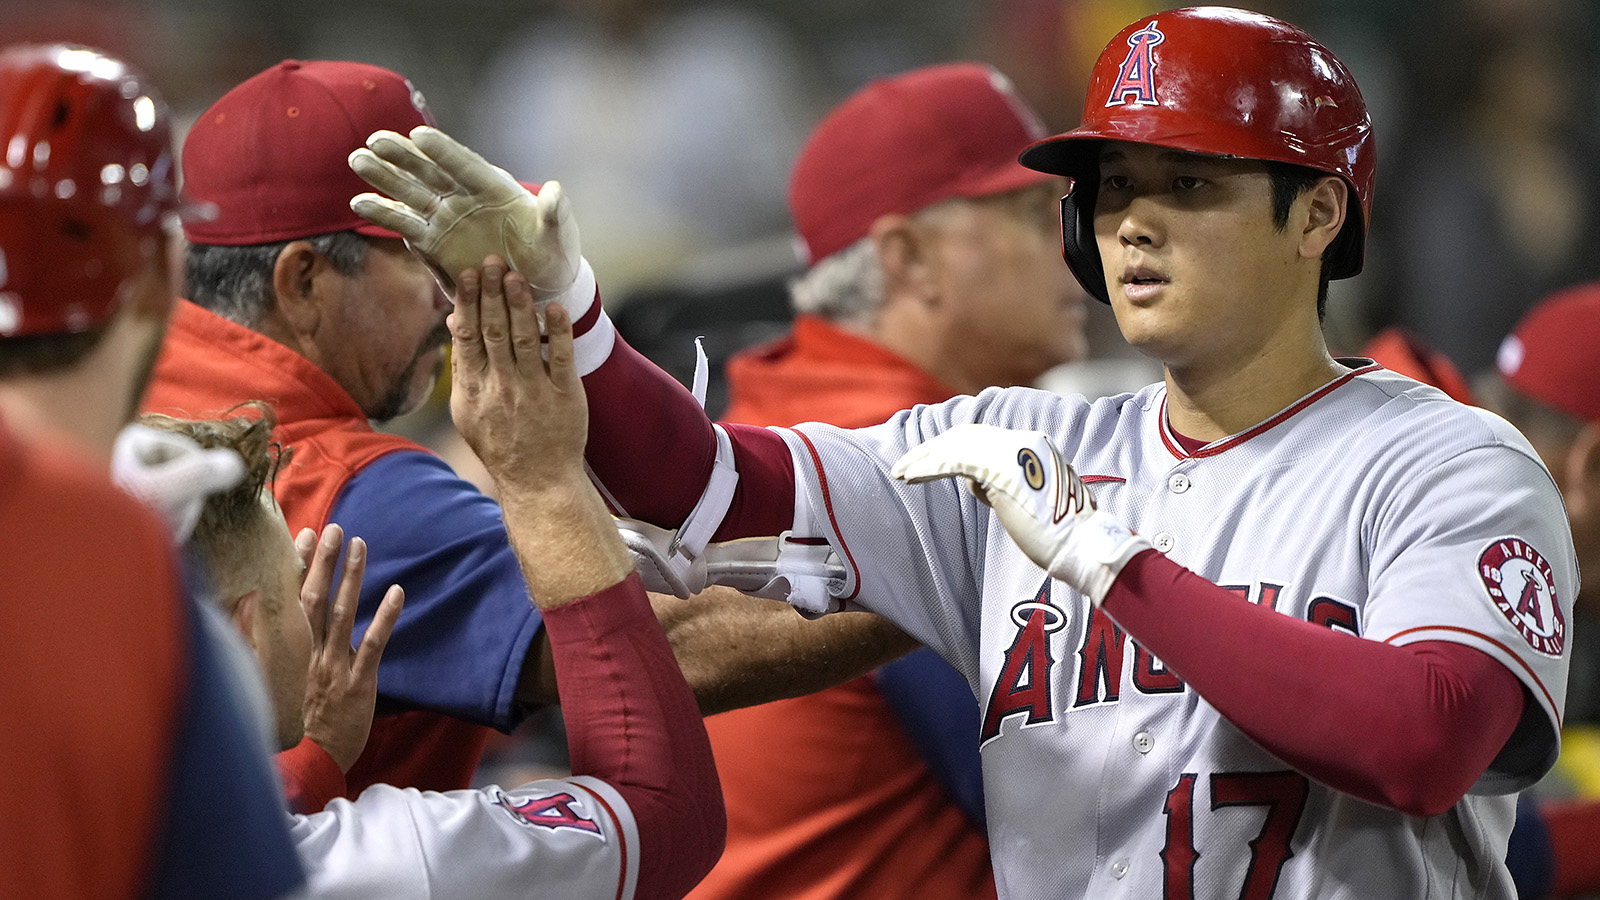 Ohtani has 10 strikeouts in six shutout innings but Angels lose to A's